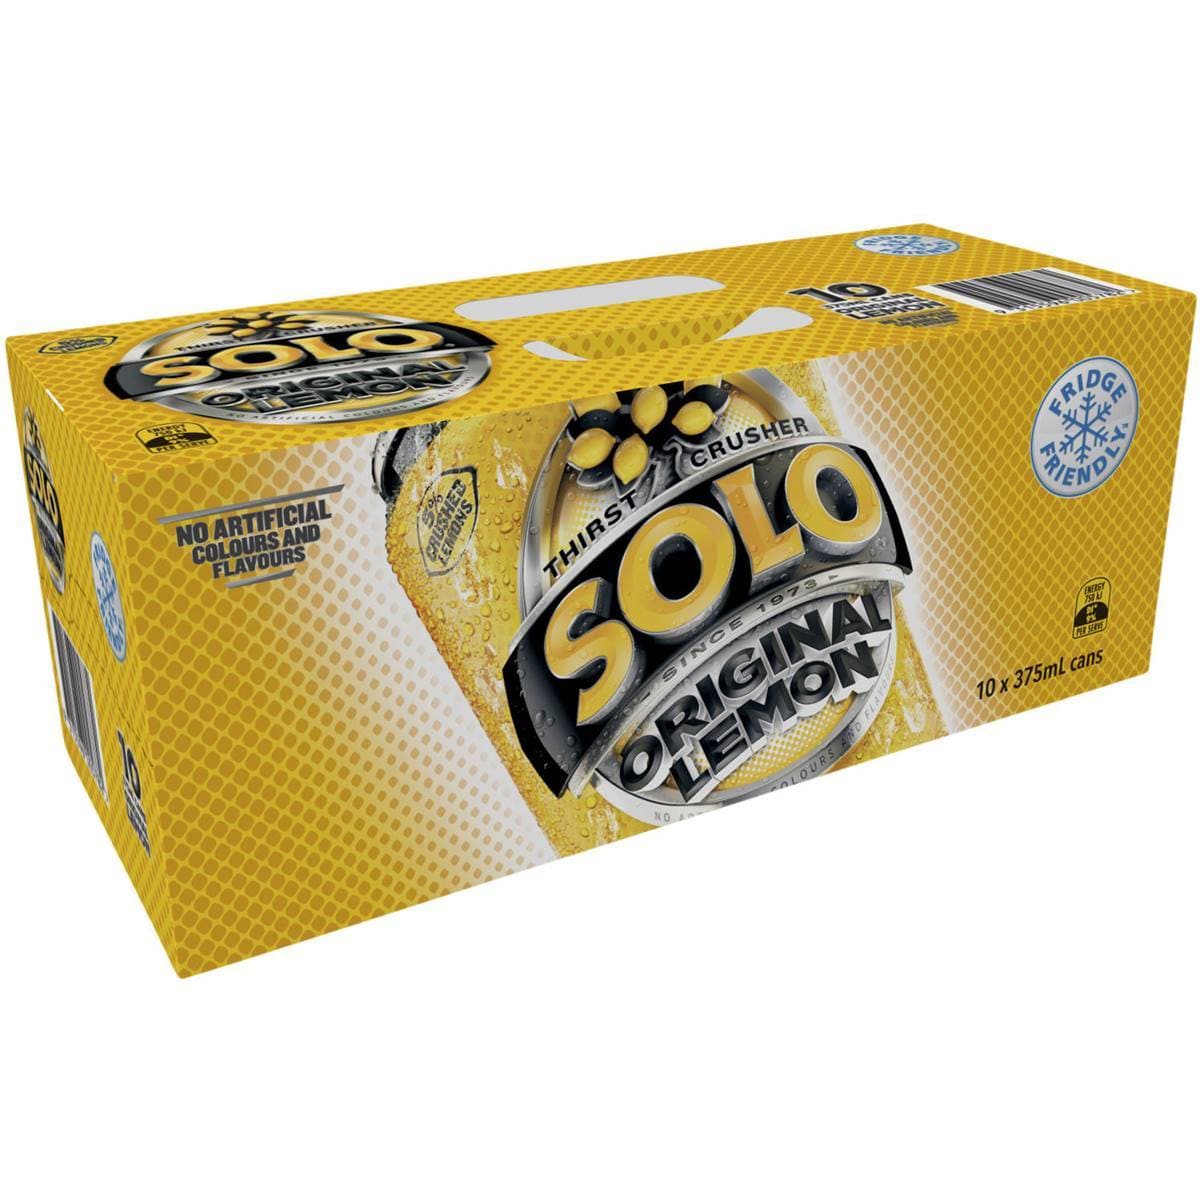 Schweppes Solo Cans 10x375ml